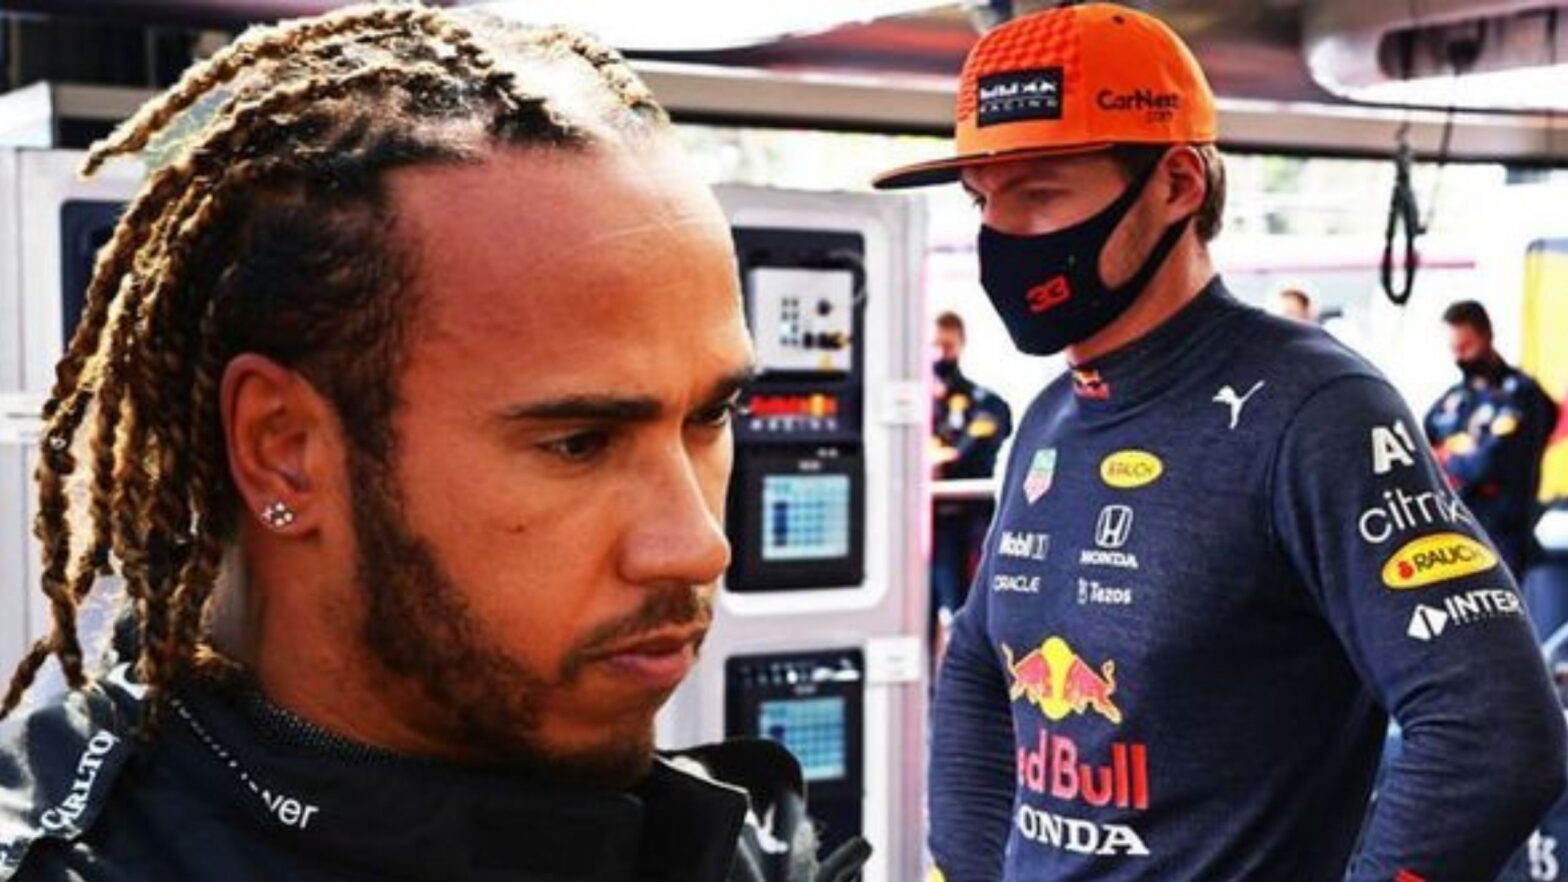 Watch “This has been manipulated, man,” Video Emerges Of Radio Message Lewis Hamilton Sent To Mercedes After Losing The Abu Dhabi GP